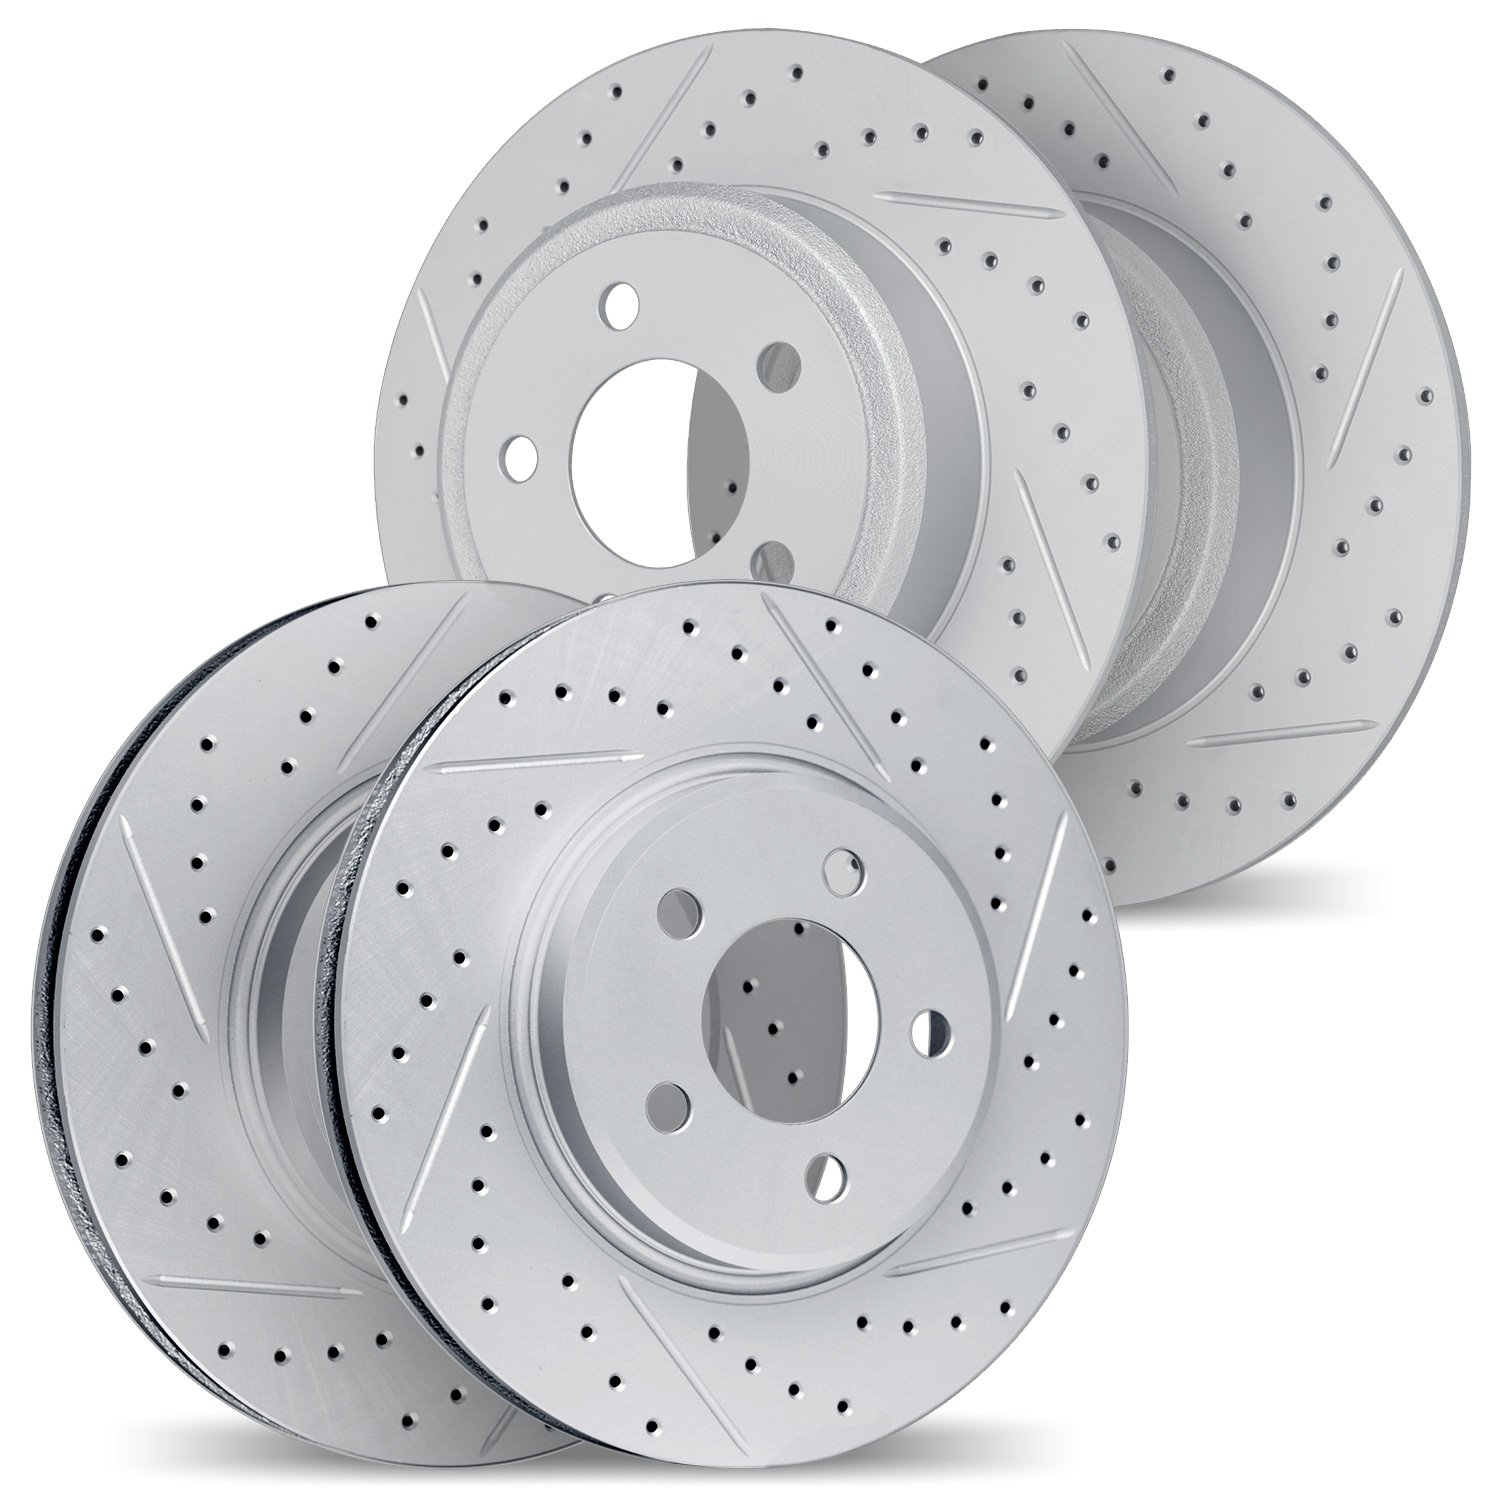 2004-27005 Geoperformance Drilled/Slotted Brake Rotors, 1996-2004 Volvo, Position: Front and Rear